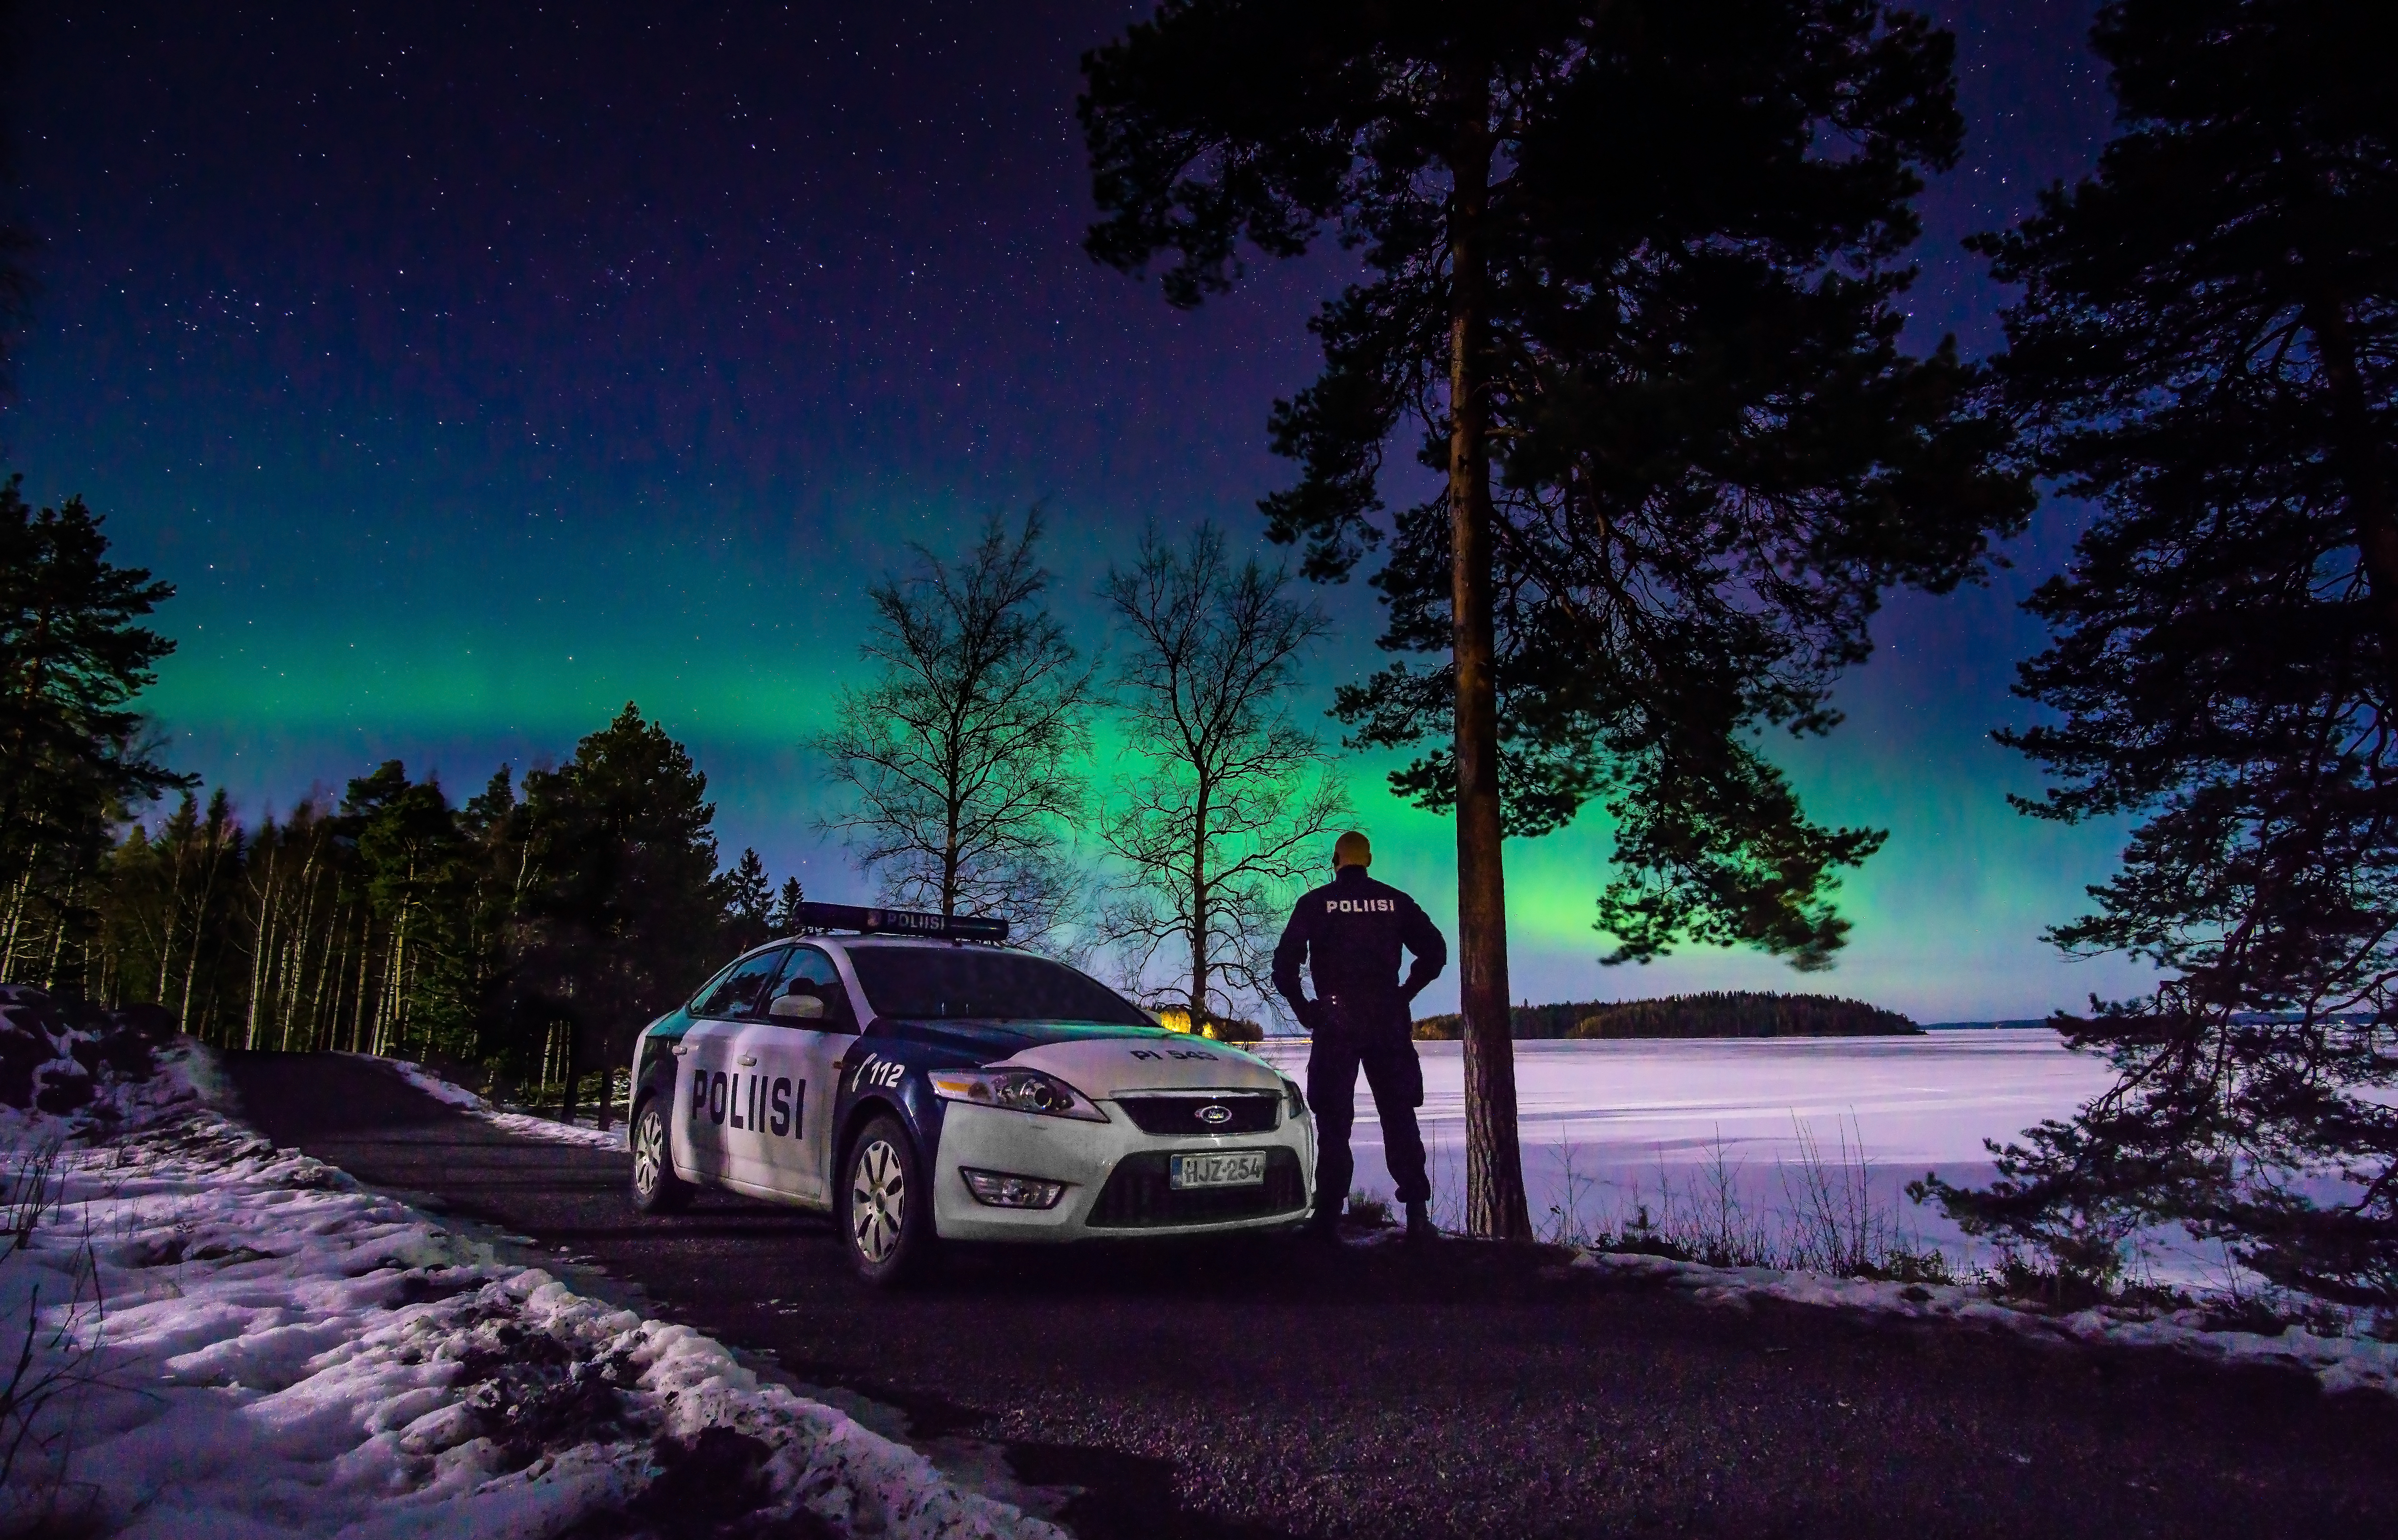 Police car and police on the lake in winter. Northern lights blazing in the background.